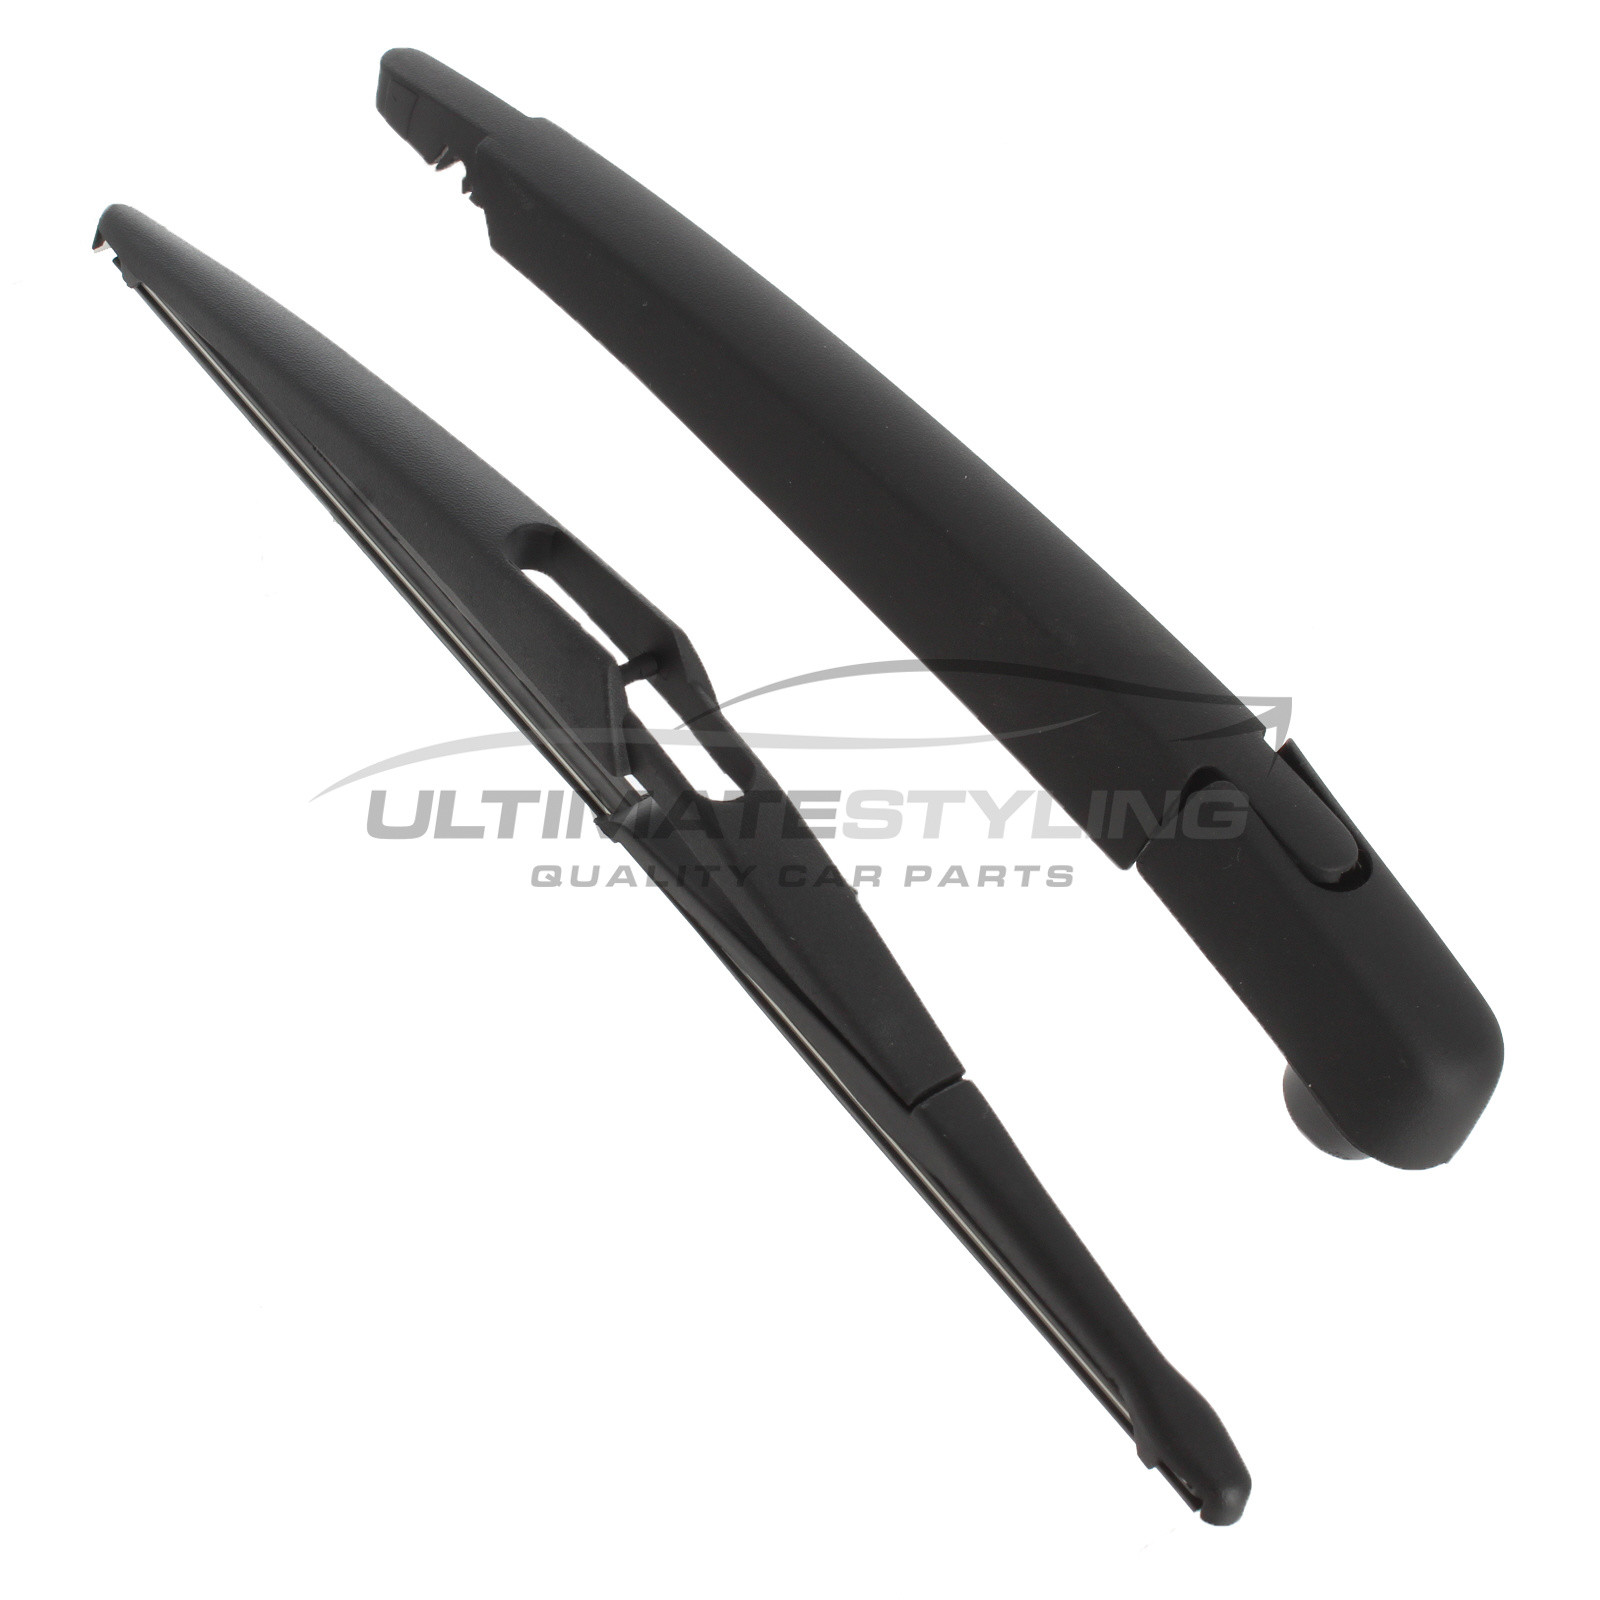 Rear Wiper Arm & Blade Set for Renault Clio